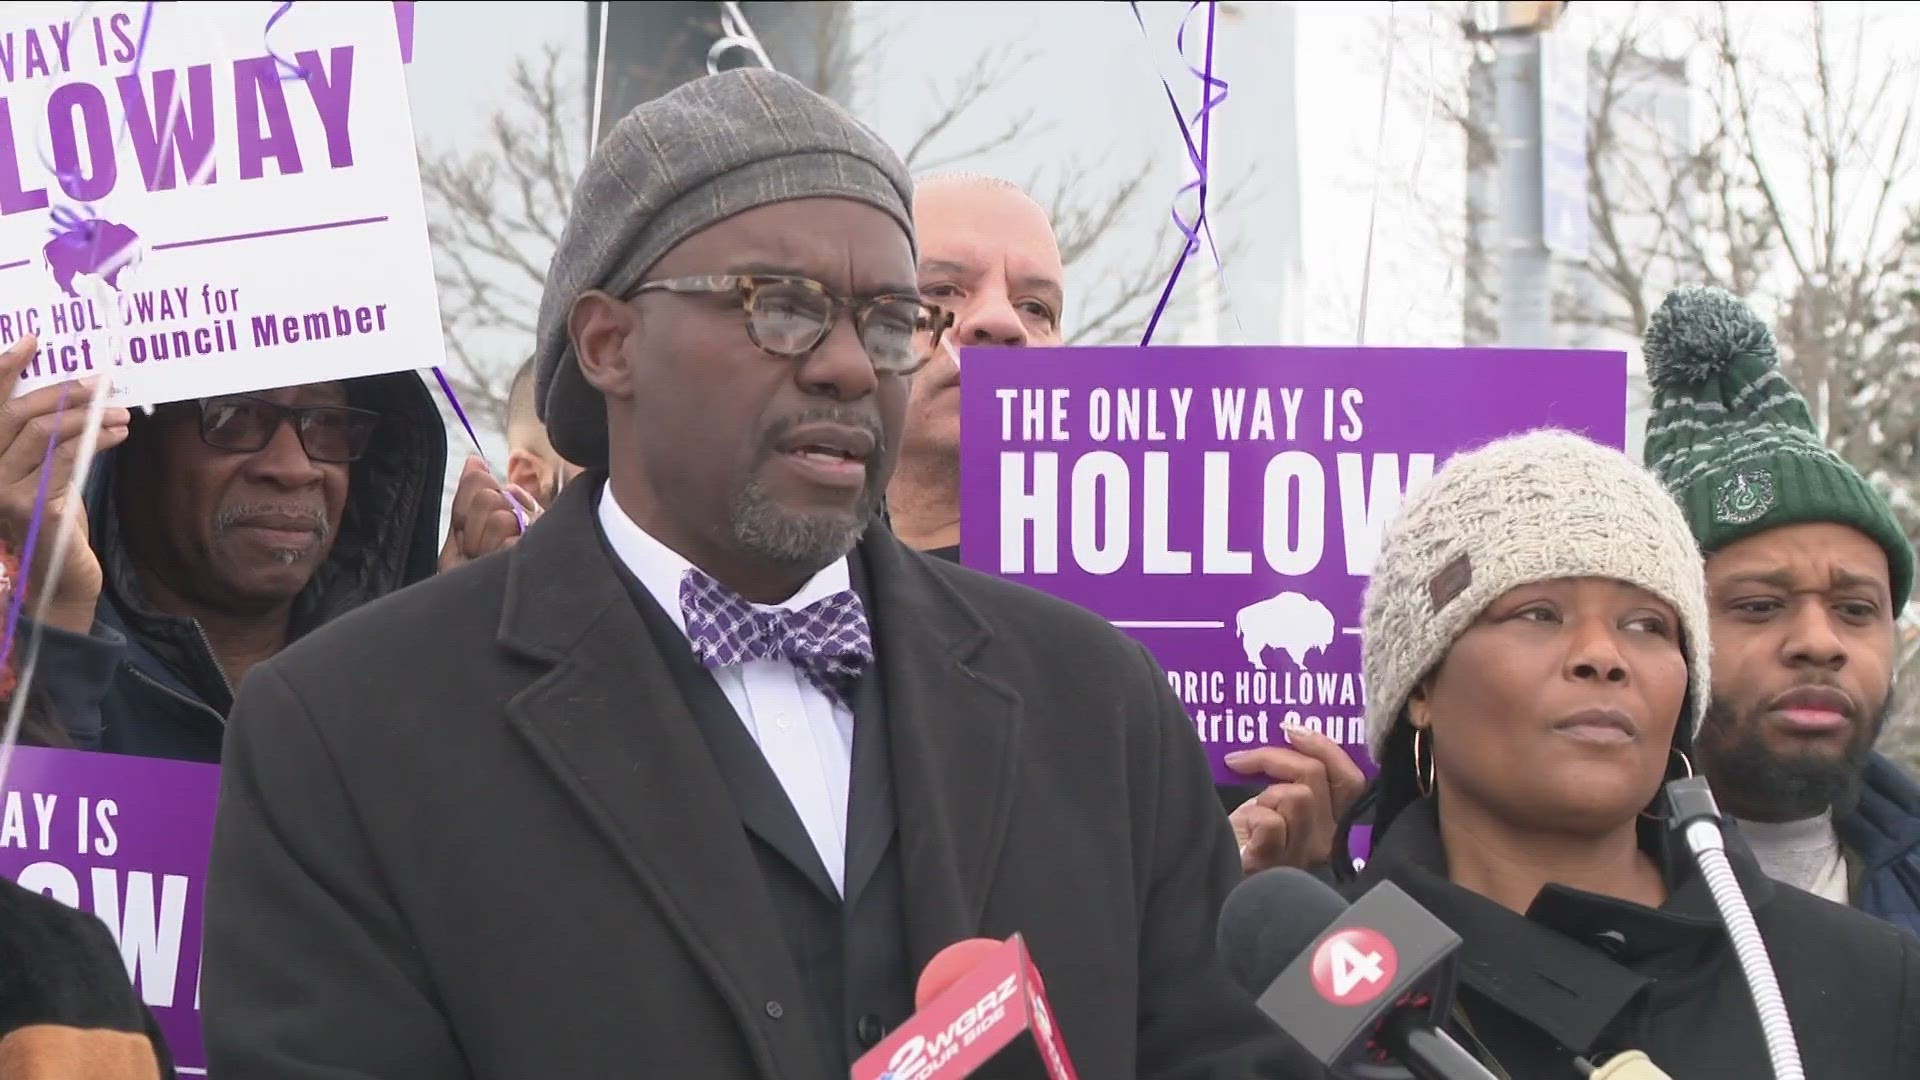 Holloway worked as police officer for 32 years. The seat is currently filled by Darius Pridgen.